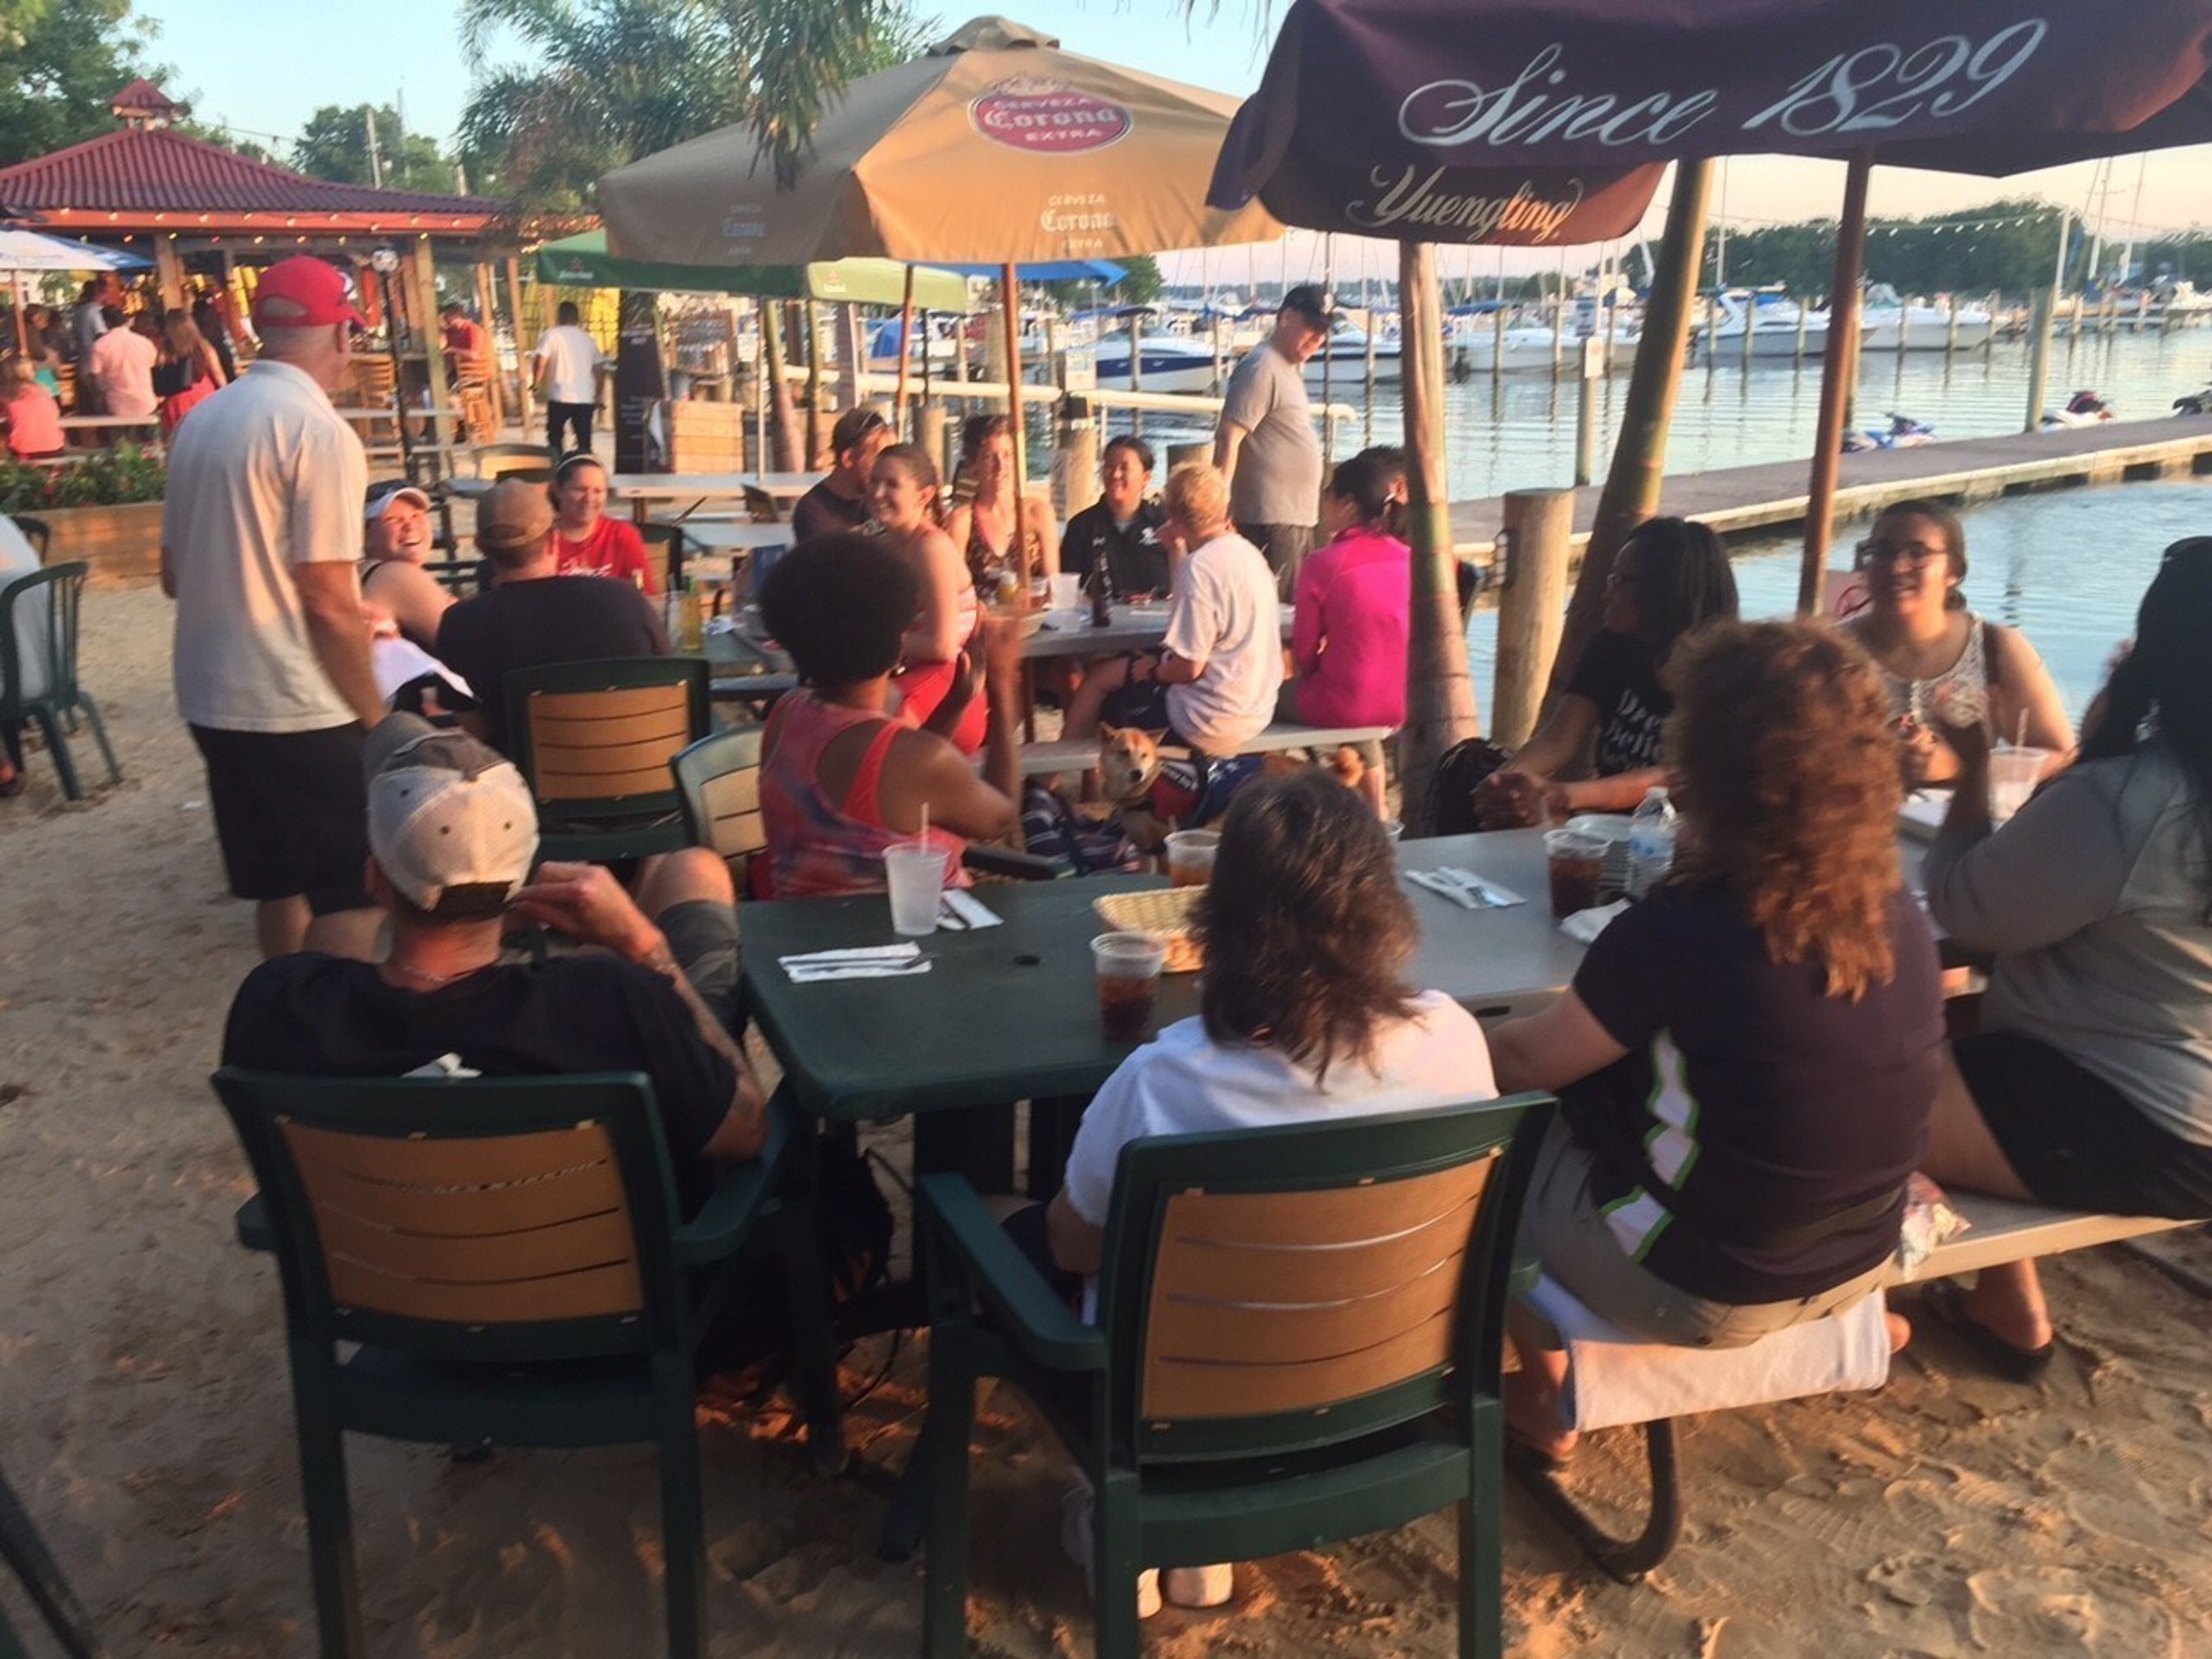 Wounded warriors recently enjoyed socializing during a monster stand-up paddleboarding competition at a program gathering with Wounded Warrior Project in Middle River, Maryland.